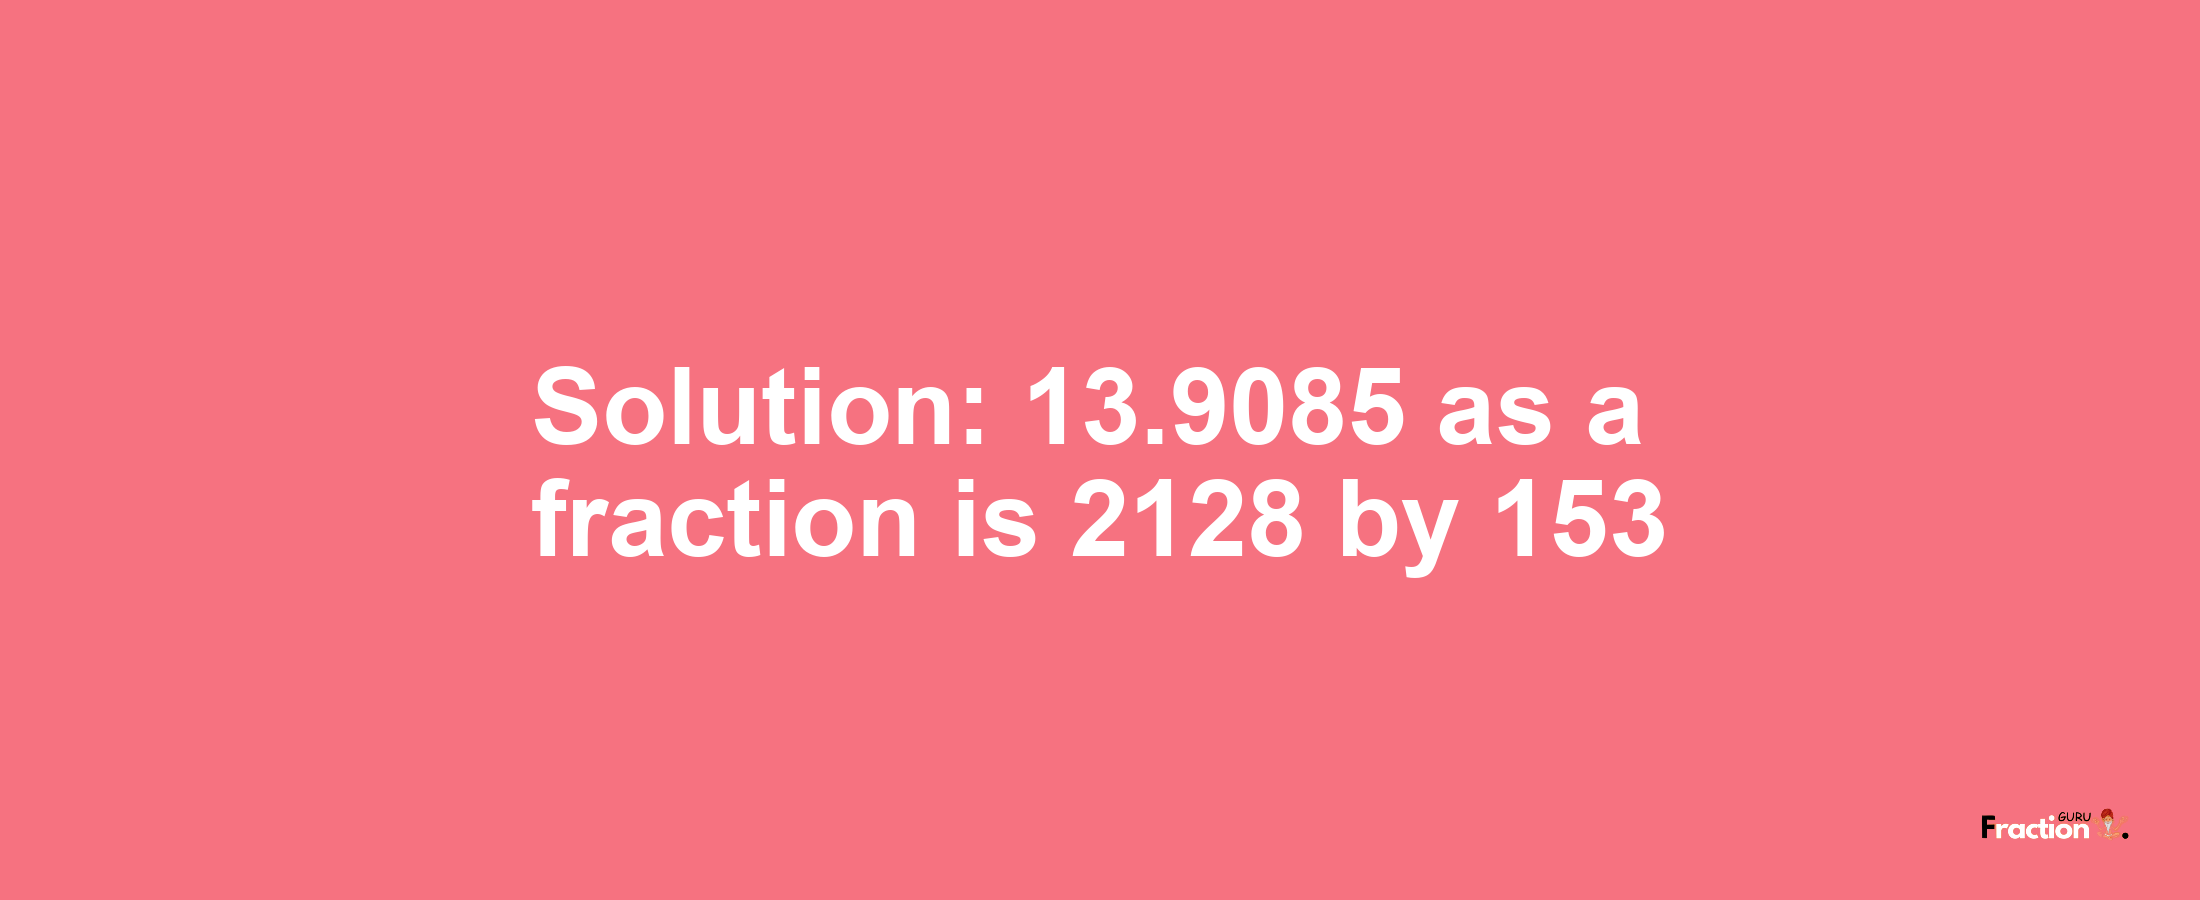 Solution:13.9085 as a fraction is 2128/153